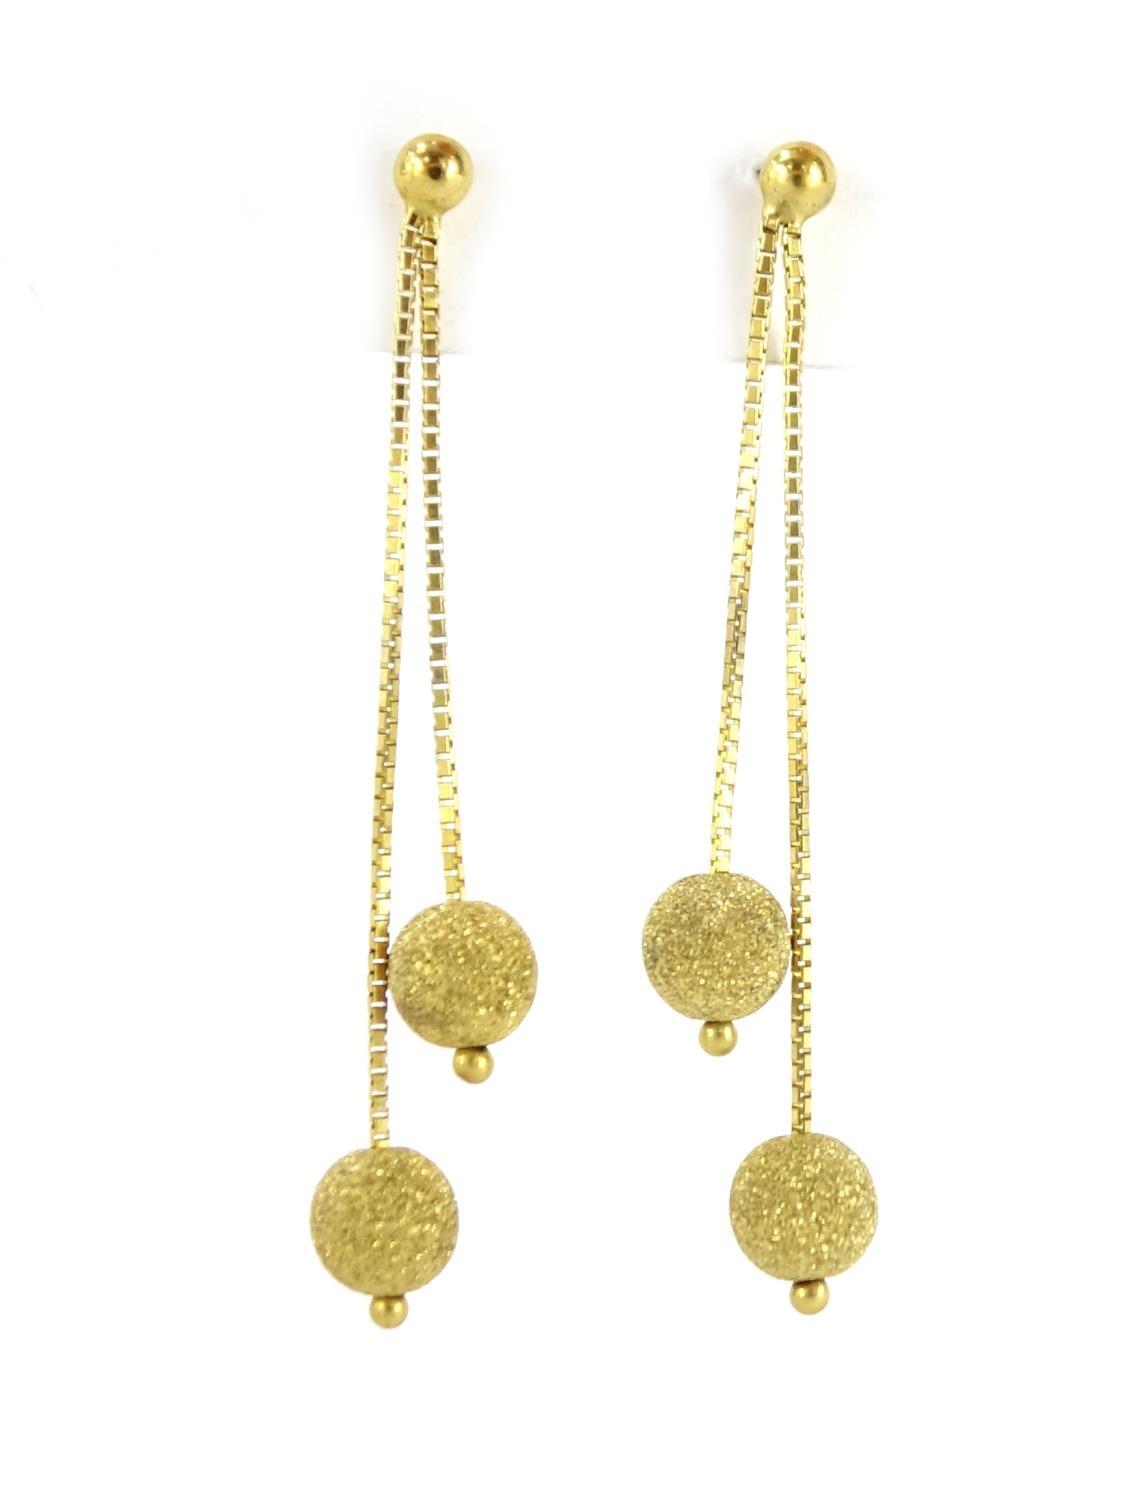 Pair of 9ct gold dangling ball drop earrings, 5cm long, 2.6g :For Further Condition Reports Please